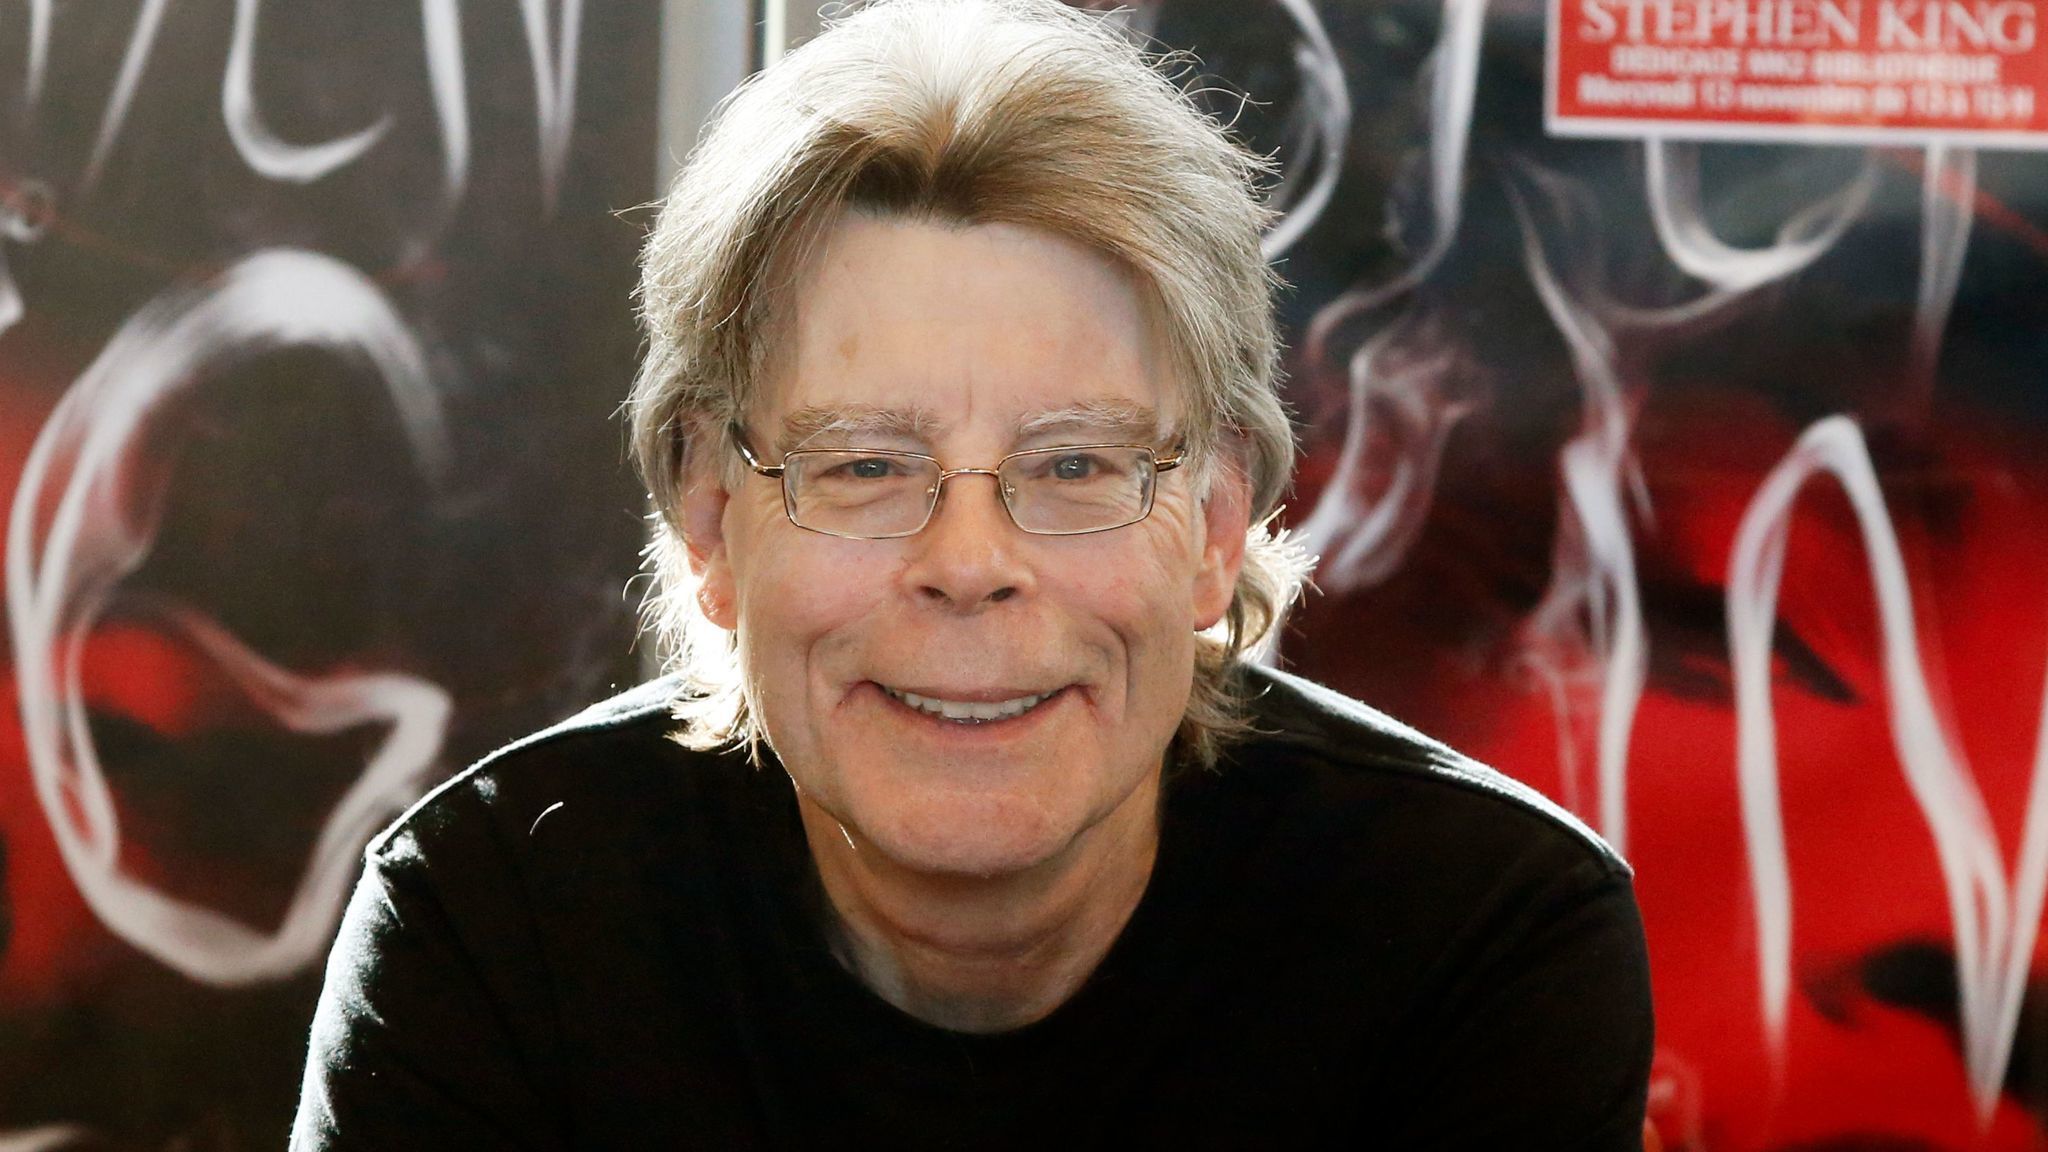 Stephen King's scary clown Pennywise wants your vote - Los Angeles Times